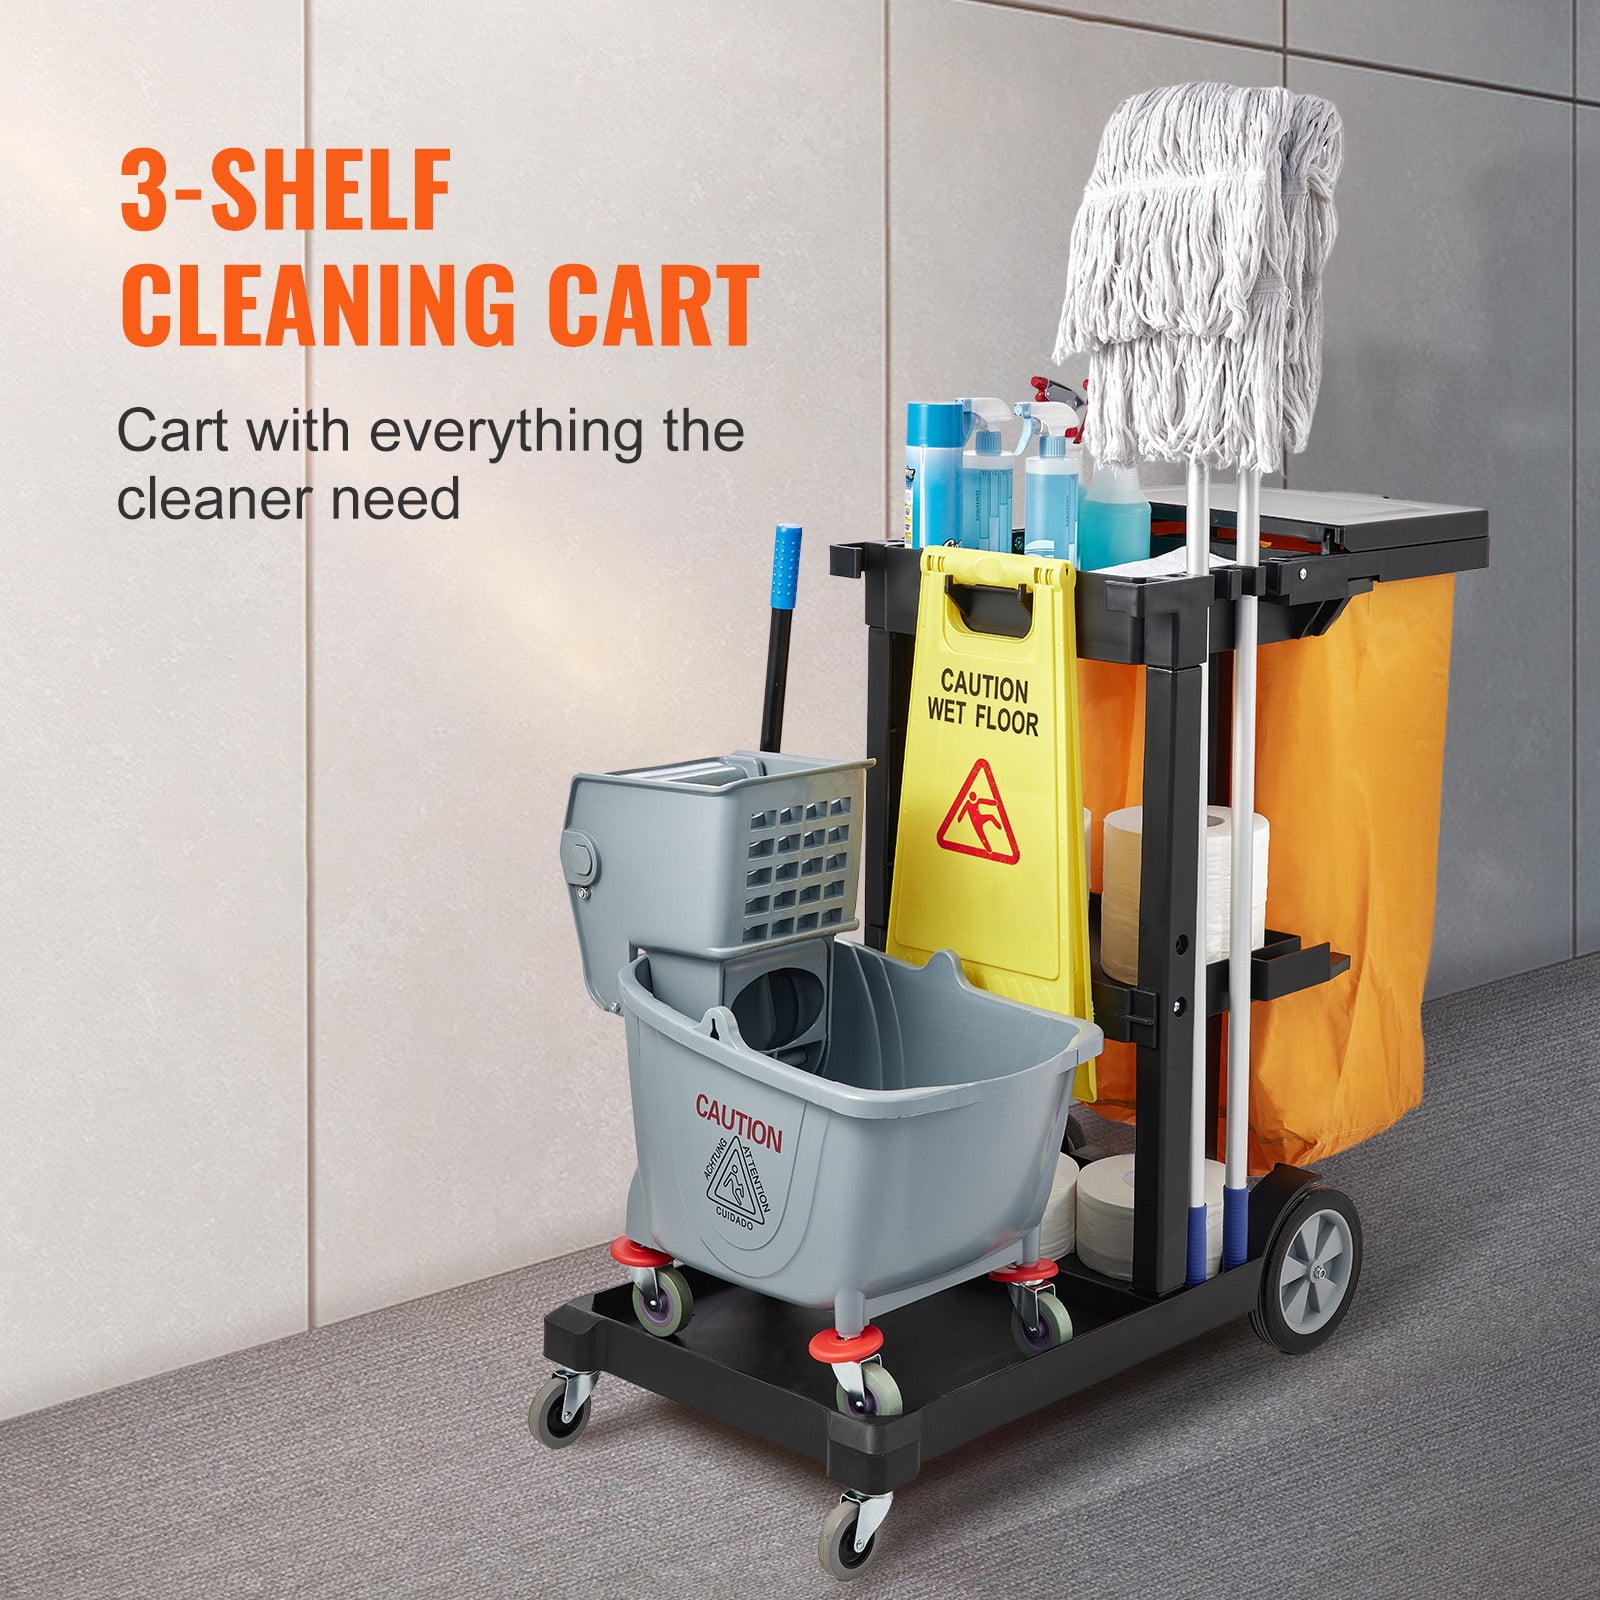 Tonchean Commercial Janitorial Cart 3 Shelf Housekeeping Cleaning Cart, Large Capacity Utility Clean Trolley with Wheels and 25 Gallon Vinyl Bag